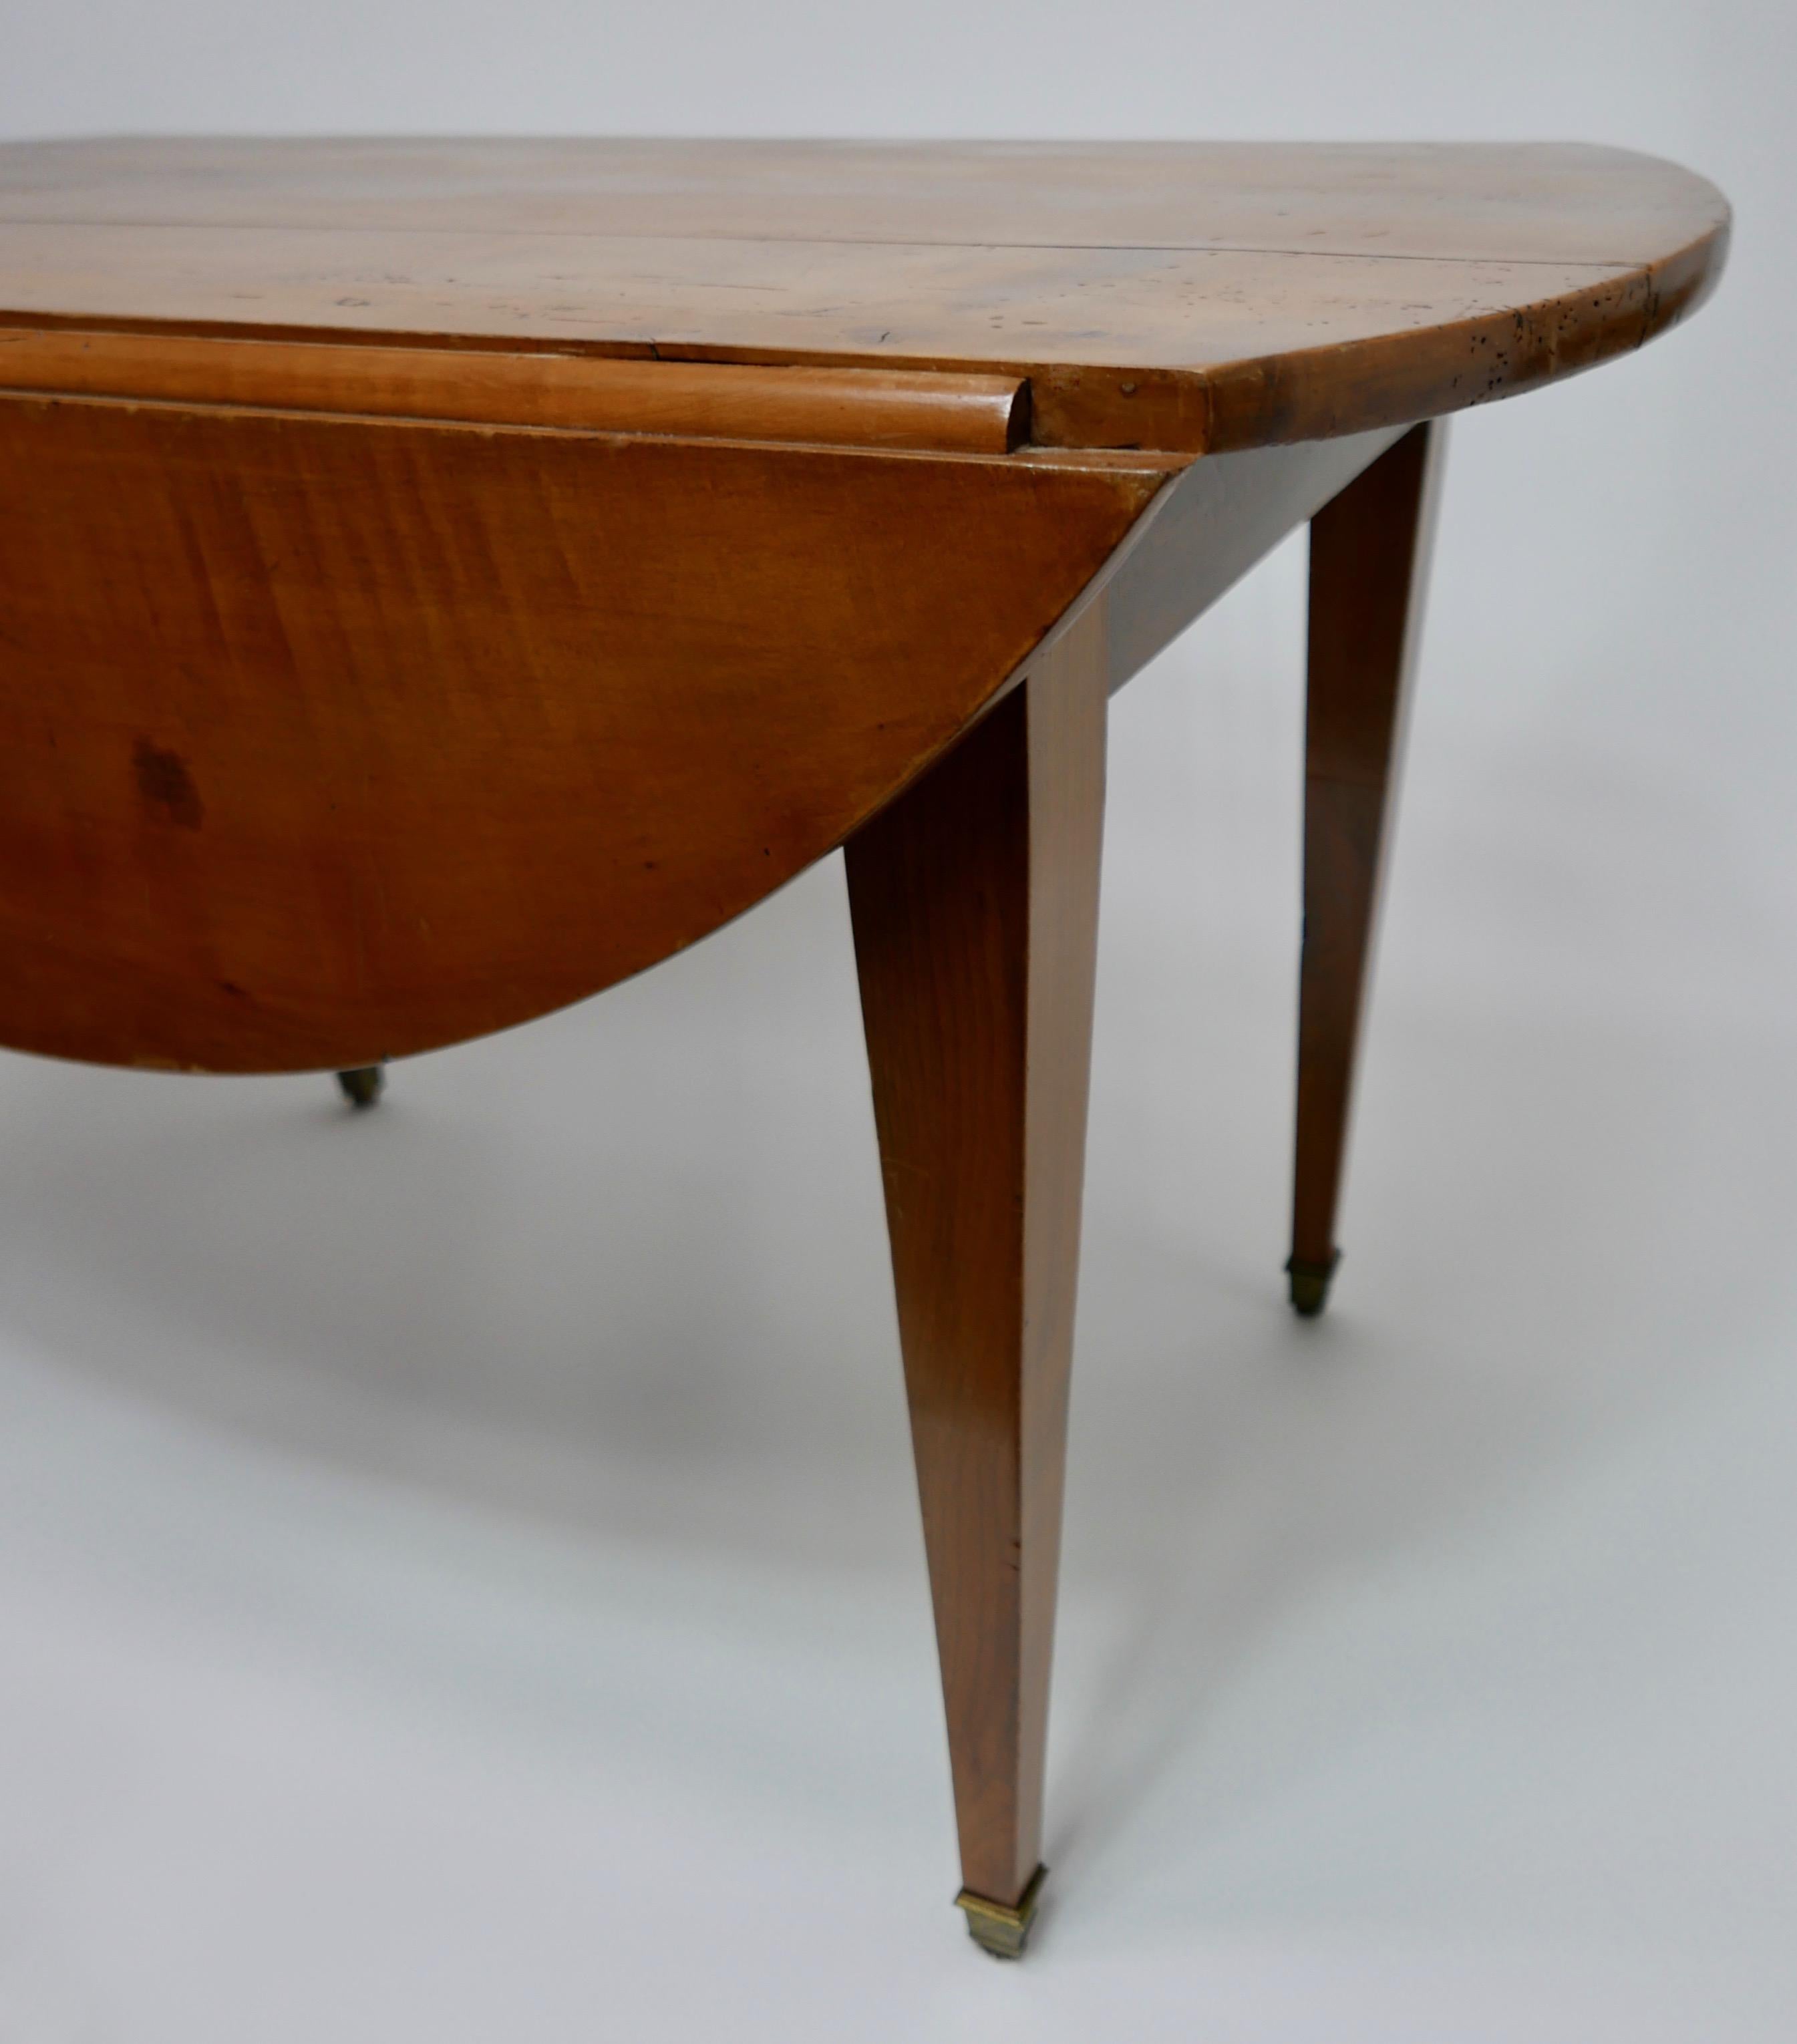 French Cherry Wood Drop-Leaf Table, Early 19th Century 4